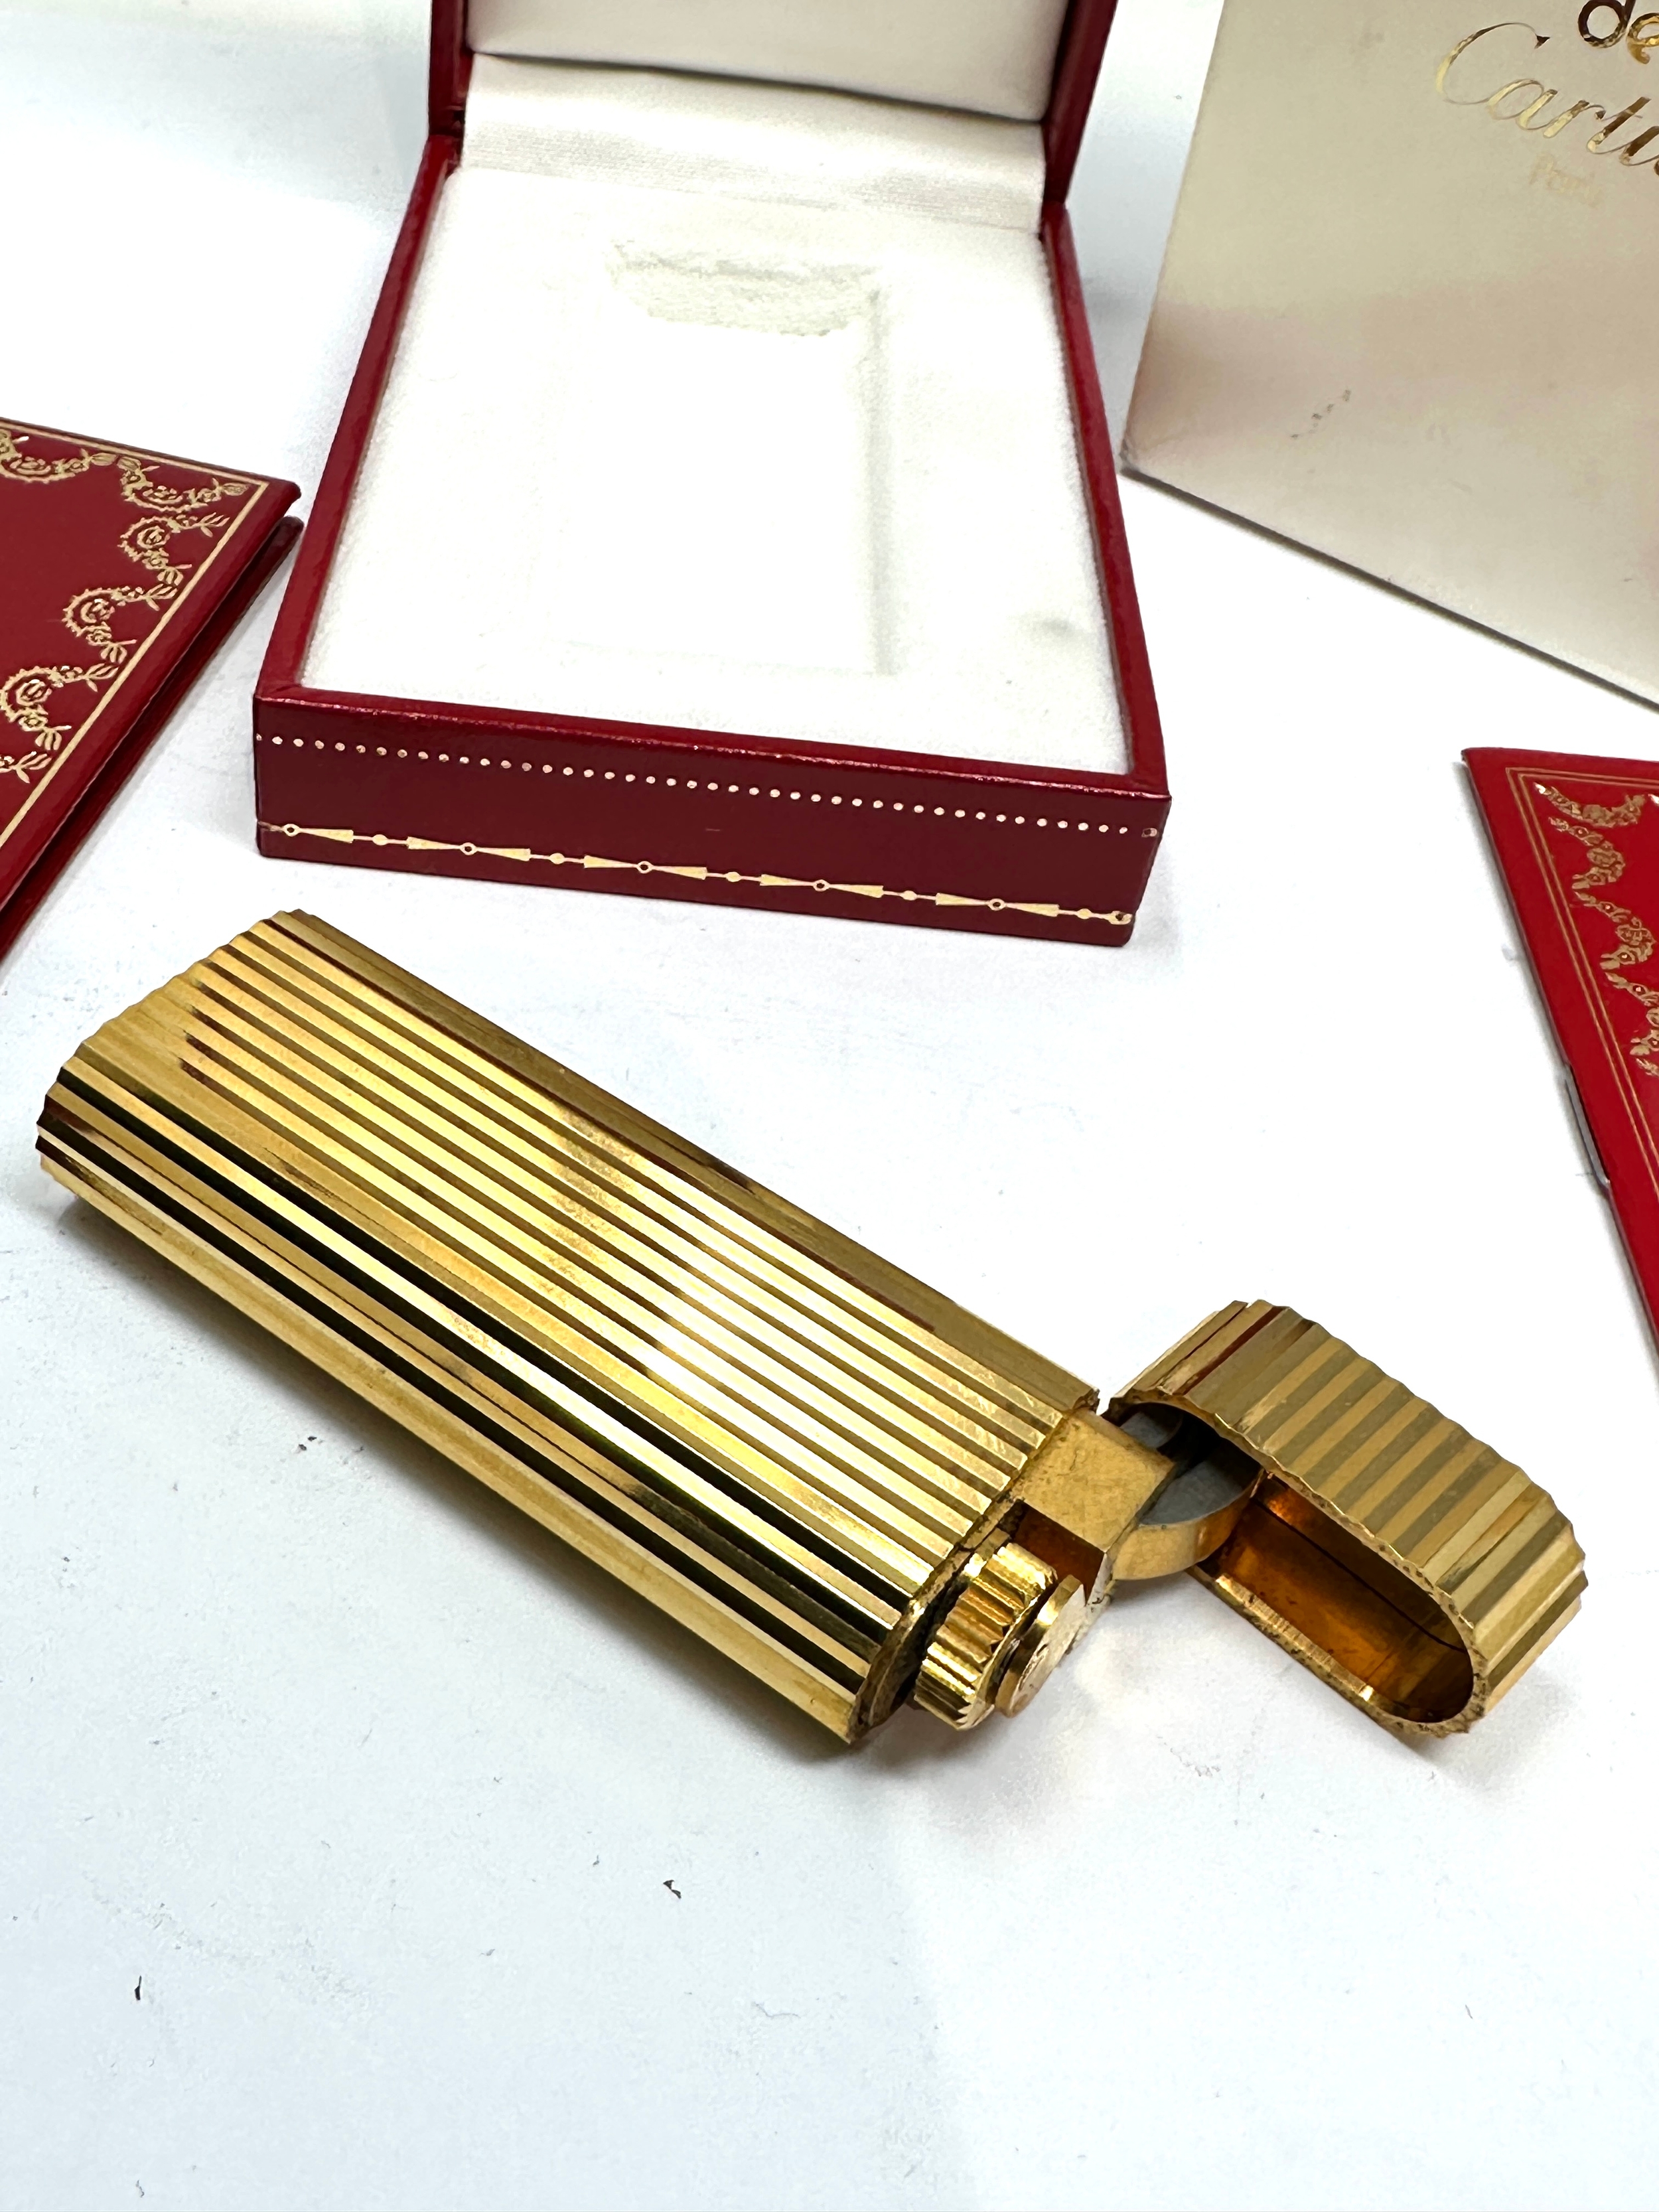 Original boxed Cartier cigarette lighter in as new condition complete with boxes and booklet - Image 3 of 4